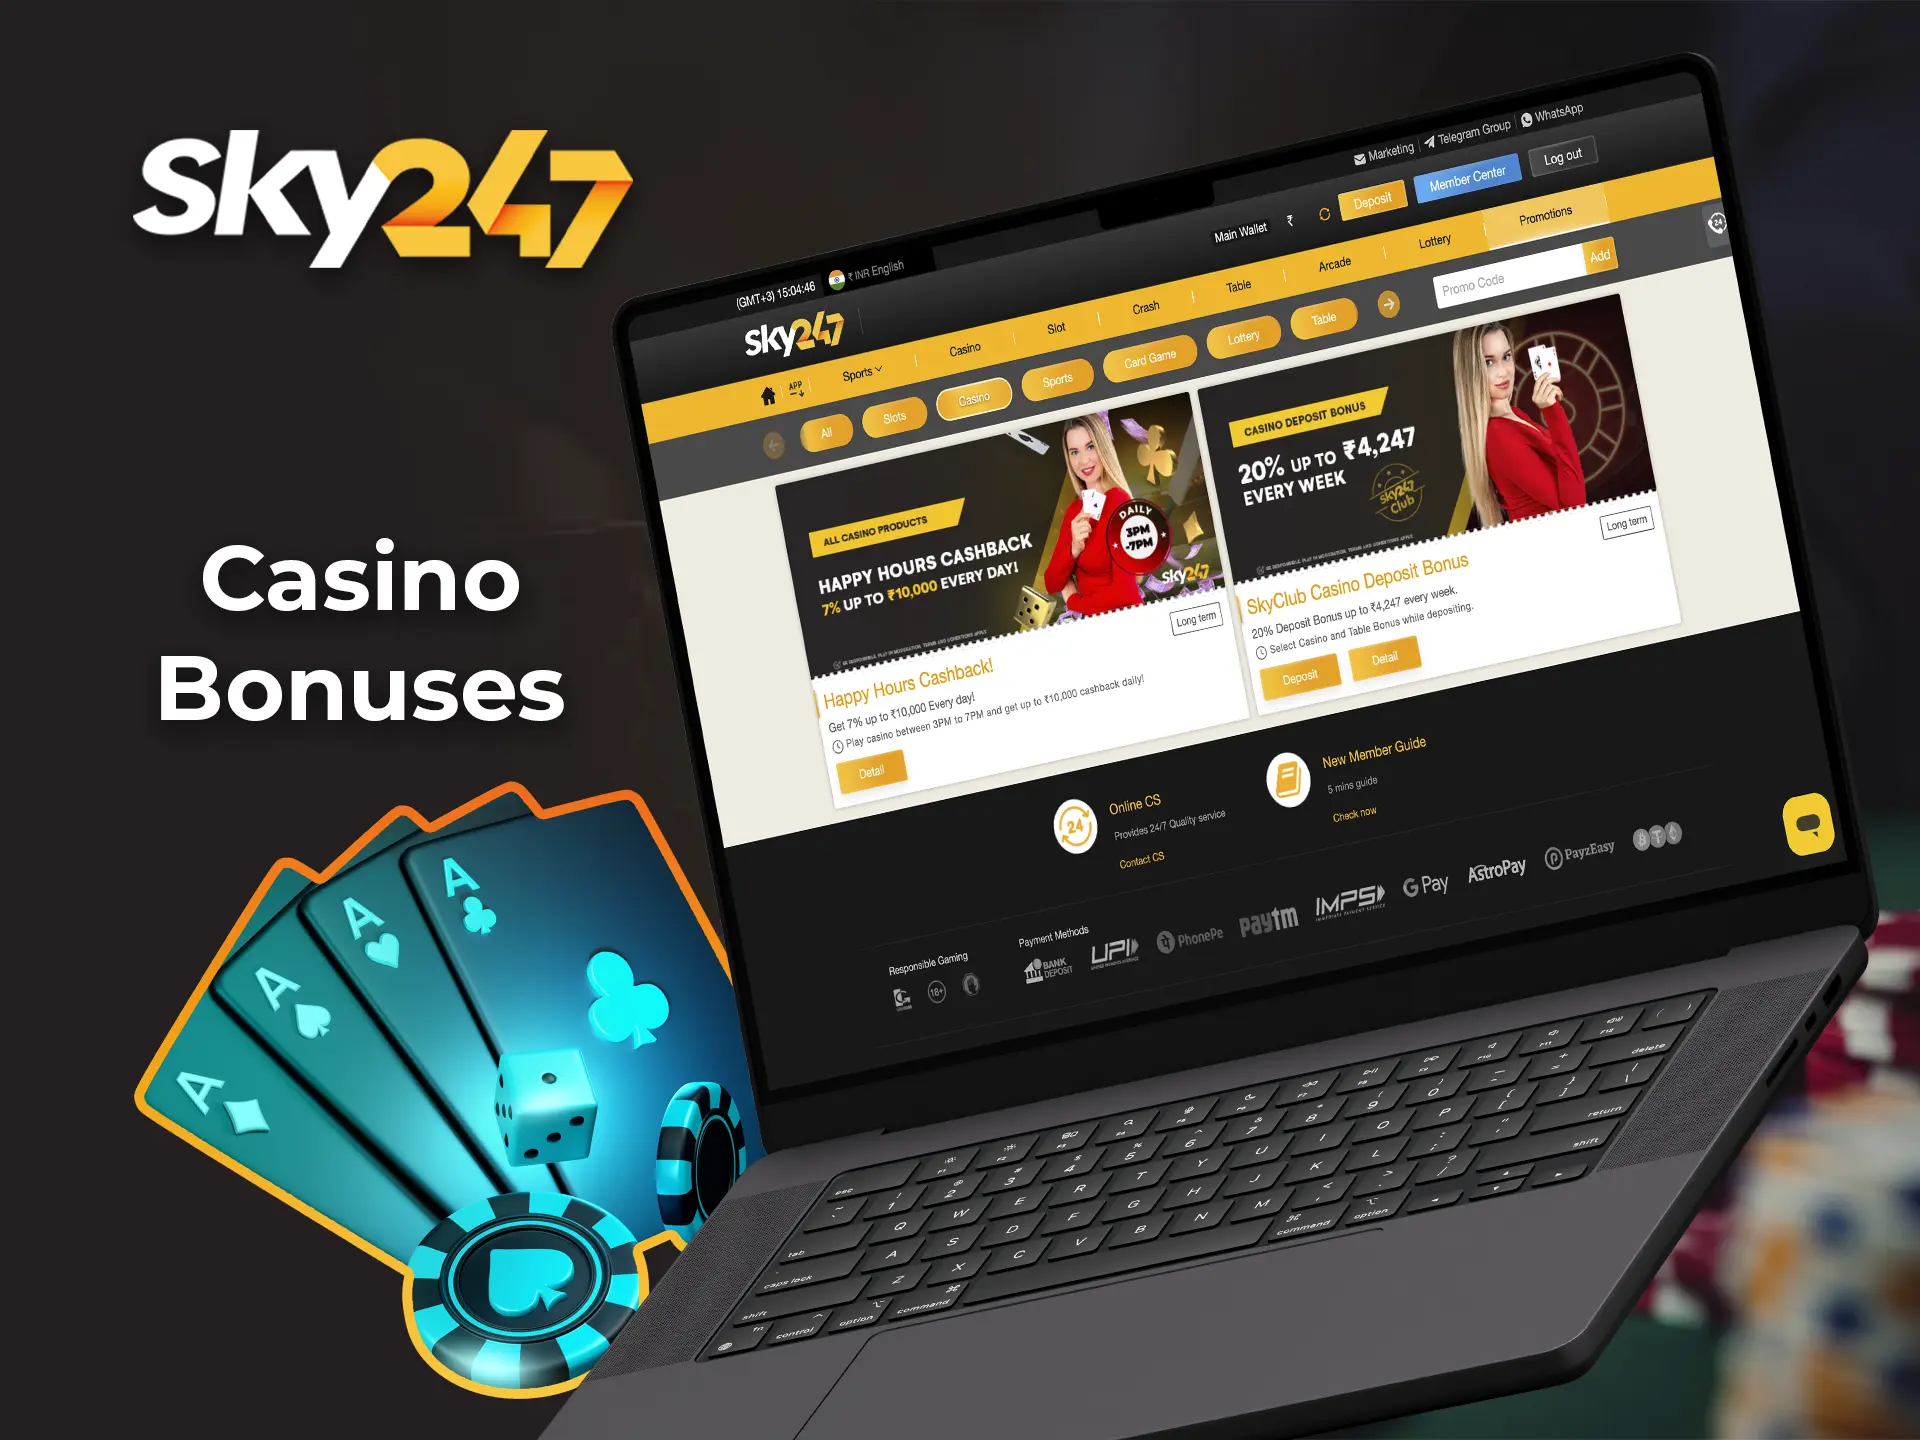 Take advantage of the bonus opportunity to increase your bets when playing with real dealers at Sky247 Casino.